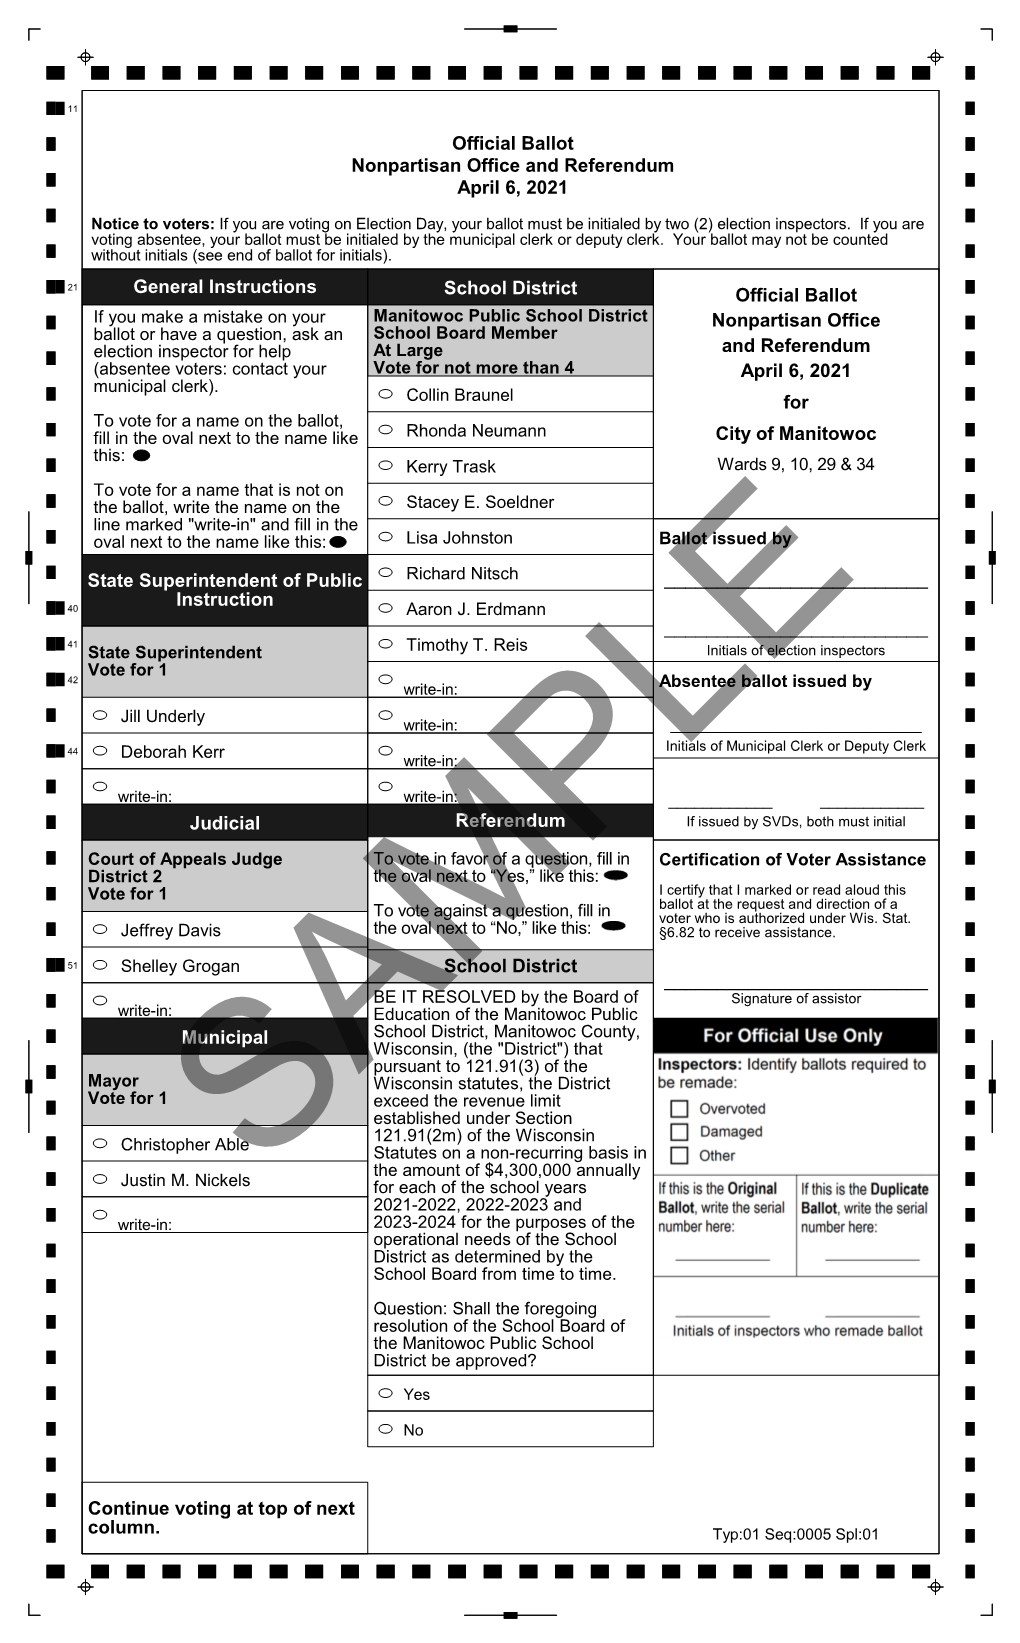 Official Ballot Nonpartisan Office and Referendum April 6, 2021 General